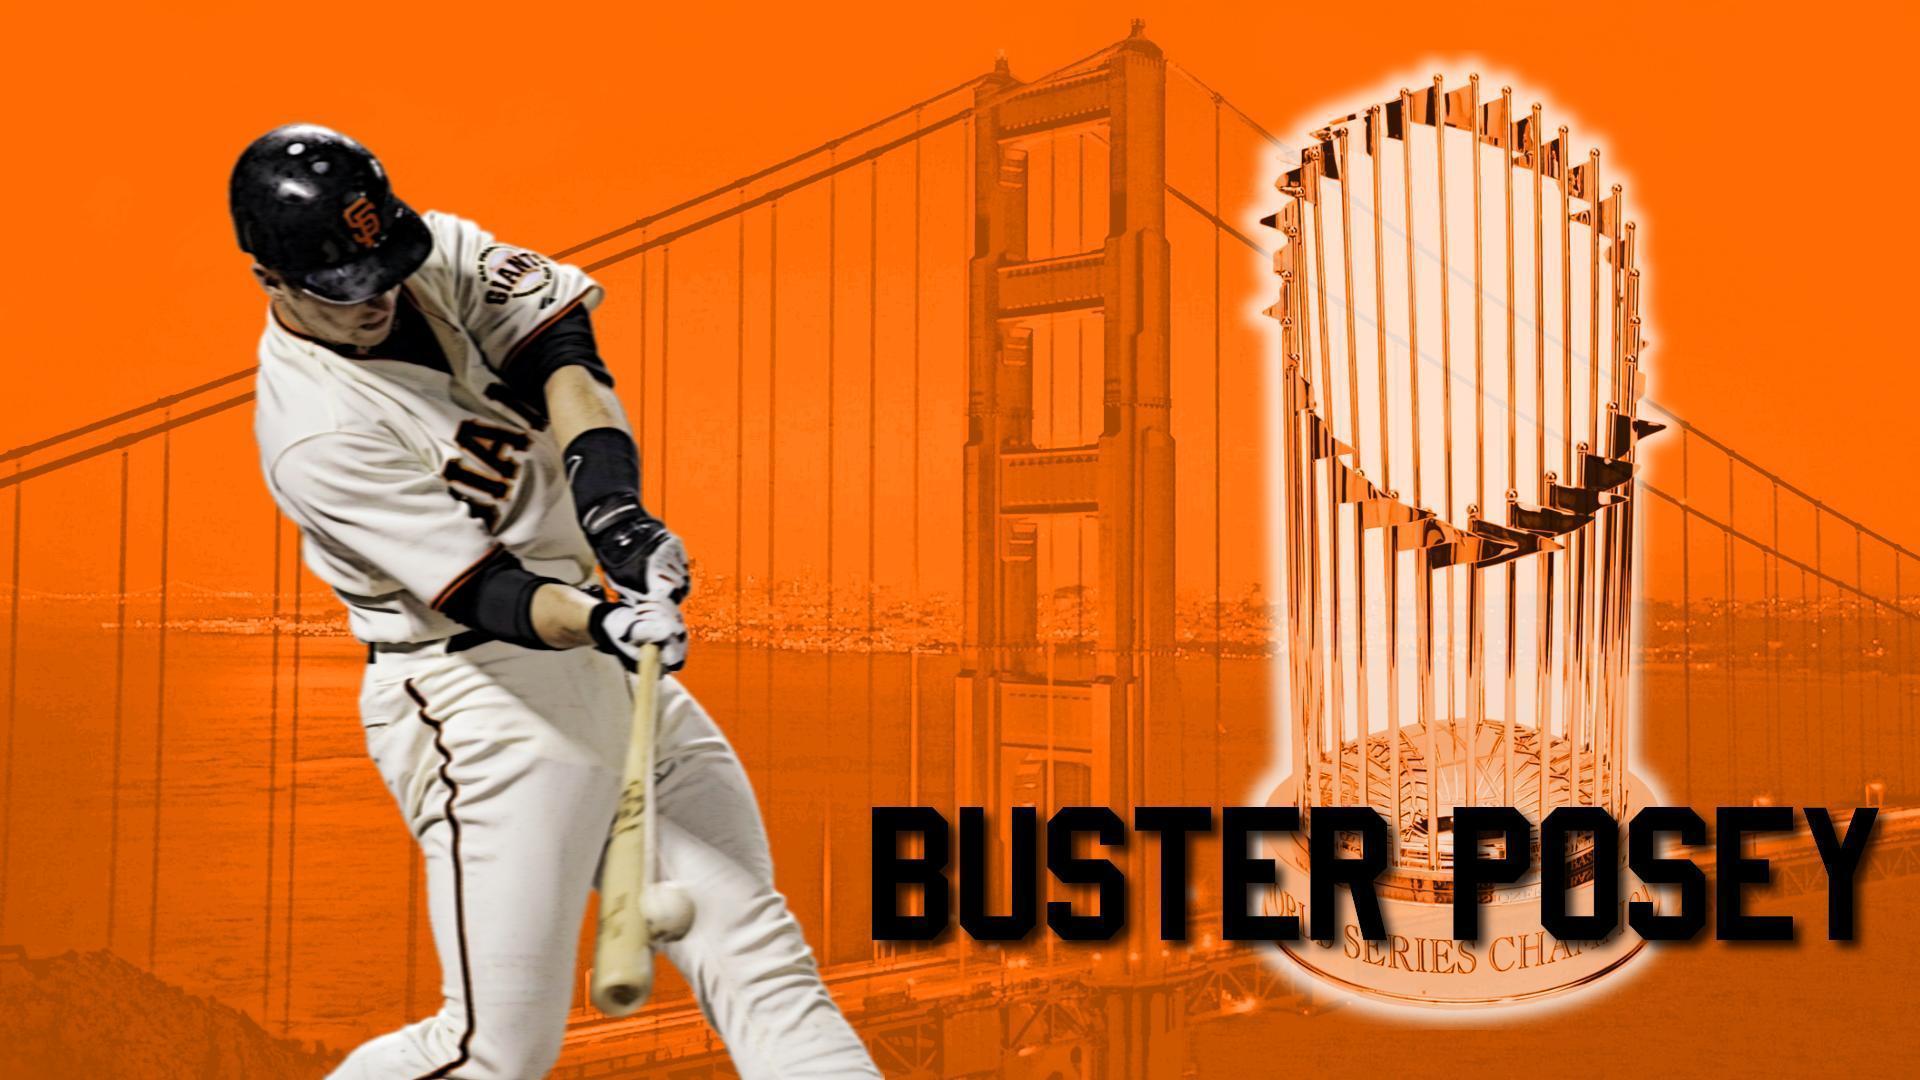 image For > Buster Posey Wallpaper